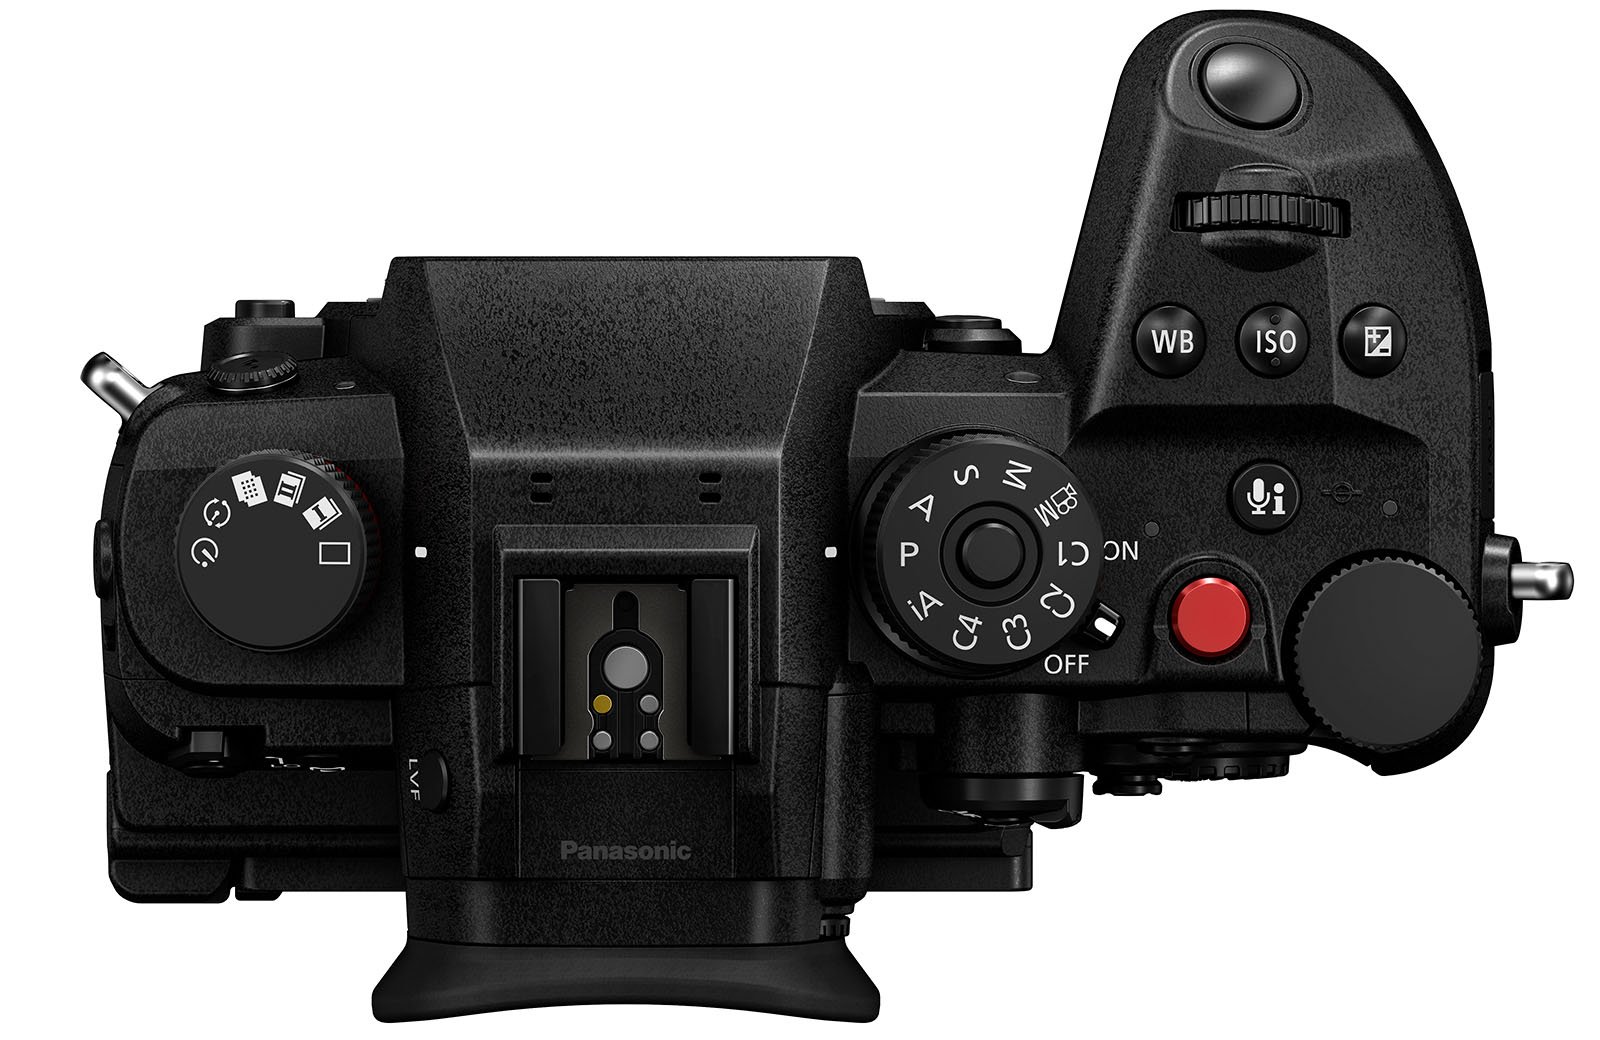 Top view of a black Panasonic Lumix camera, showing various control dials and buttons. Notable controls include a large mode dial, a red record button, a joystick, a shutter button, a white balance button, and an exposure compensation dial.